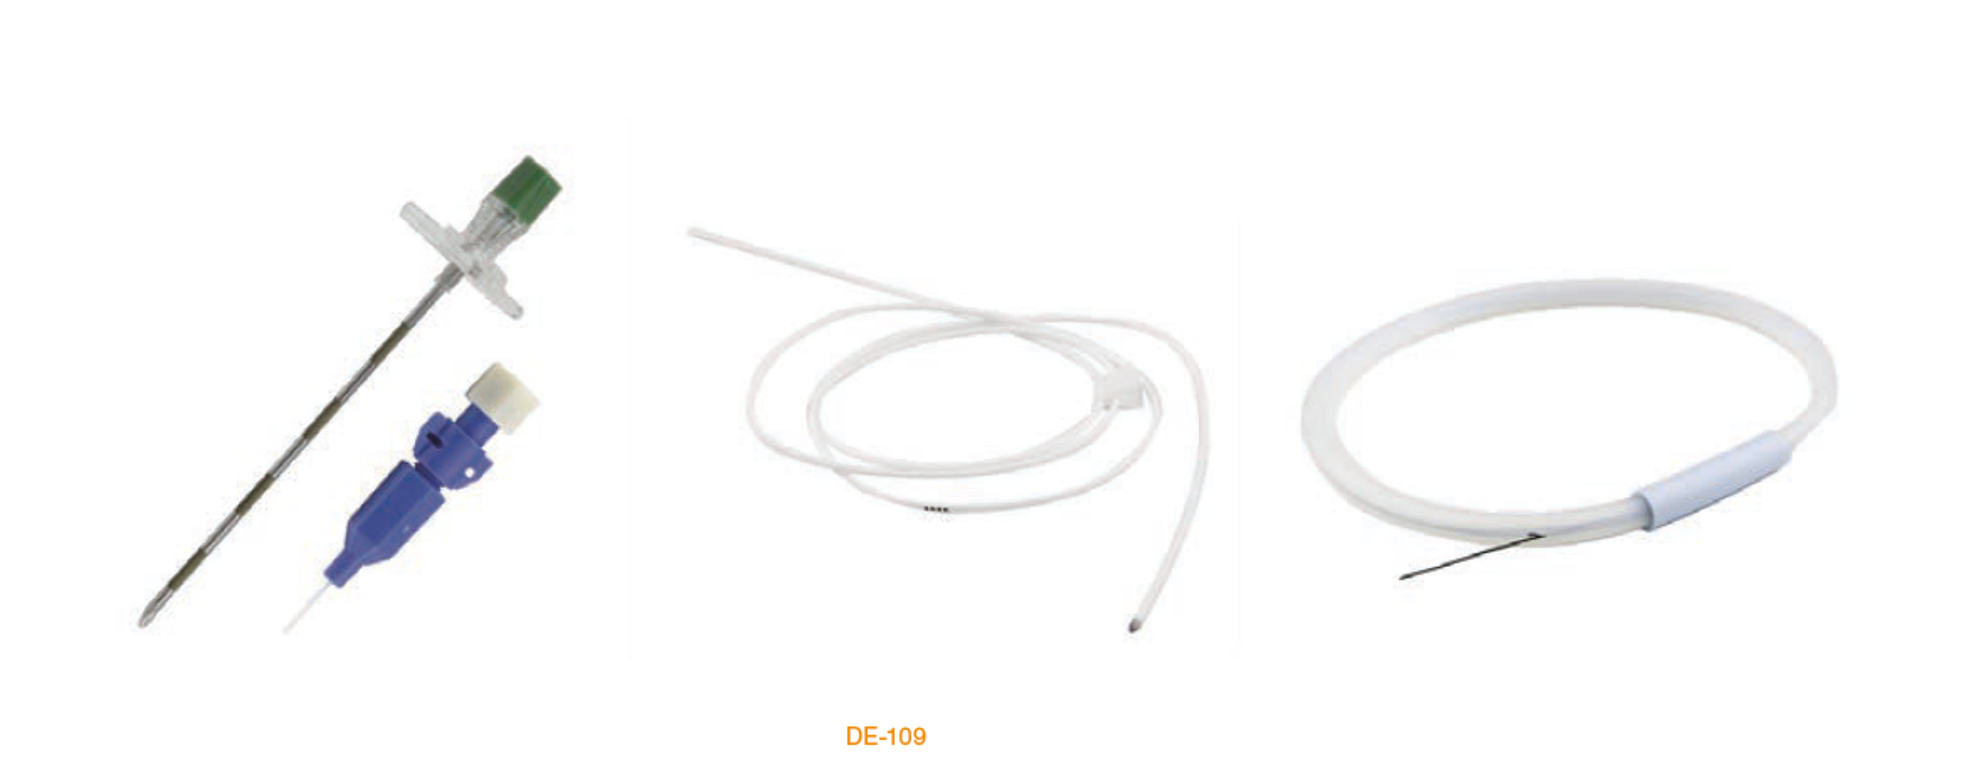 External Lumbar Catheters products from Rycol Medical in Ireland